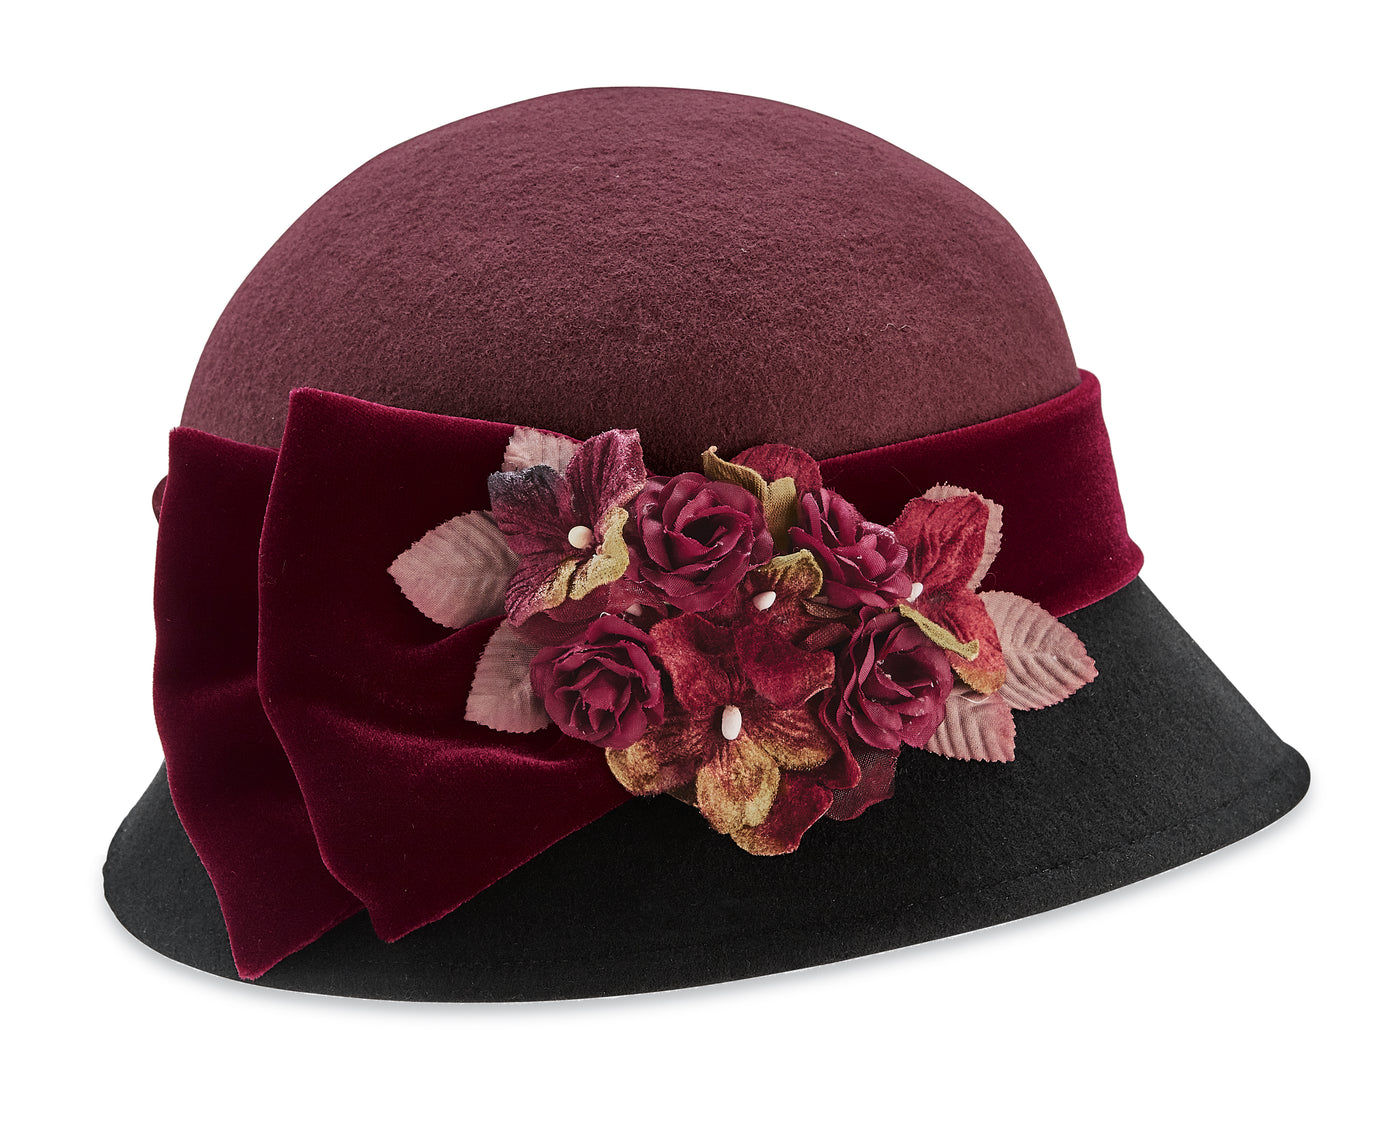 Two-Tone Cloche with Floral Rose